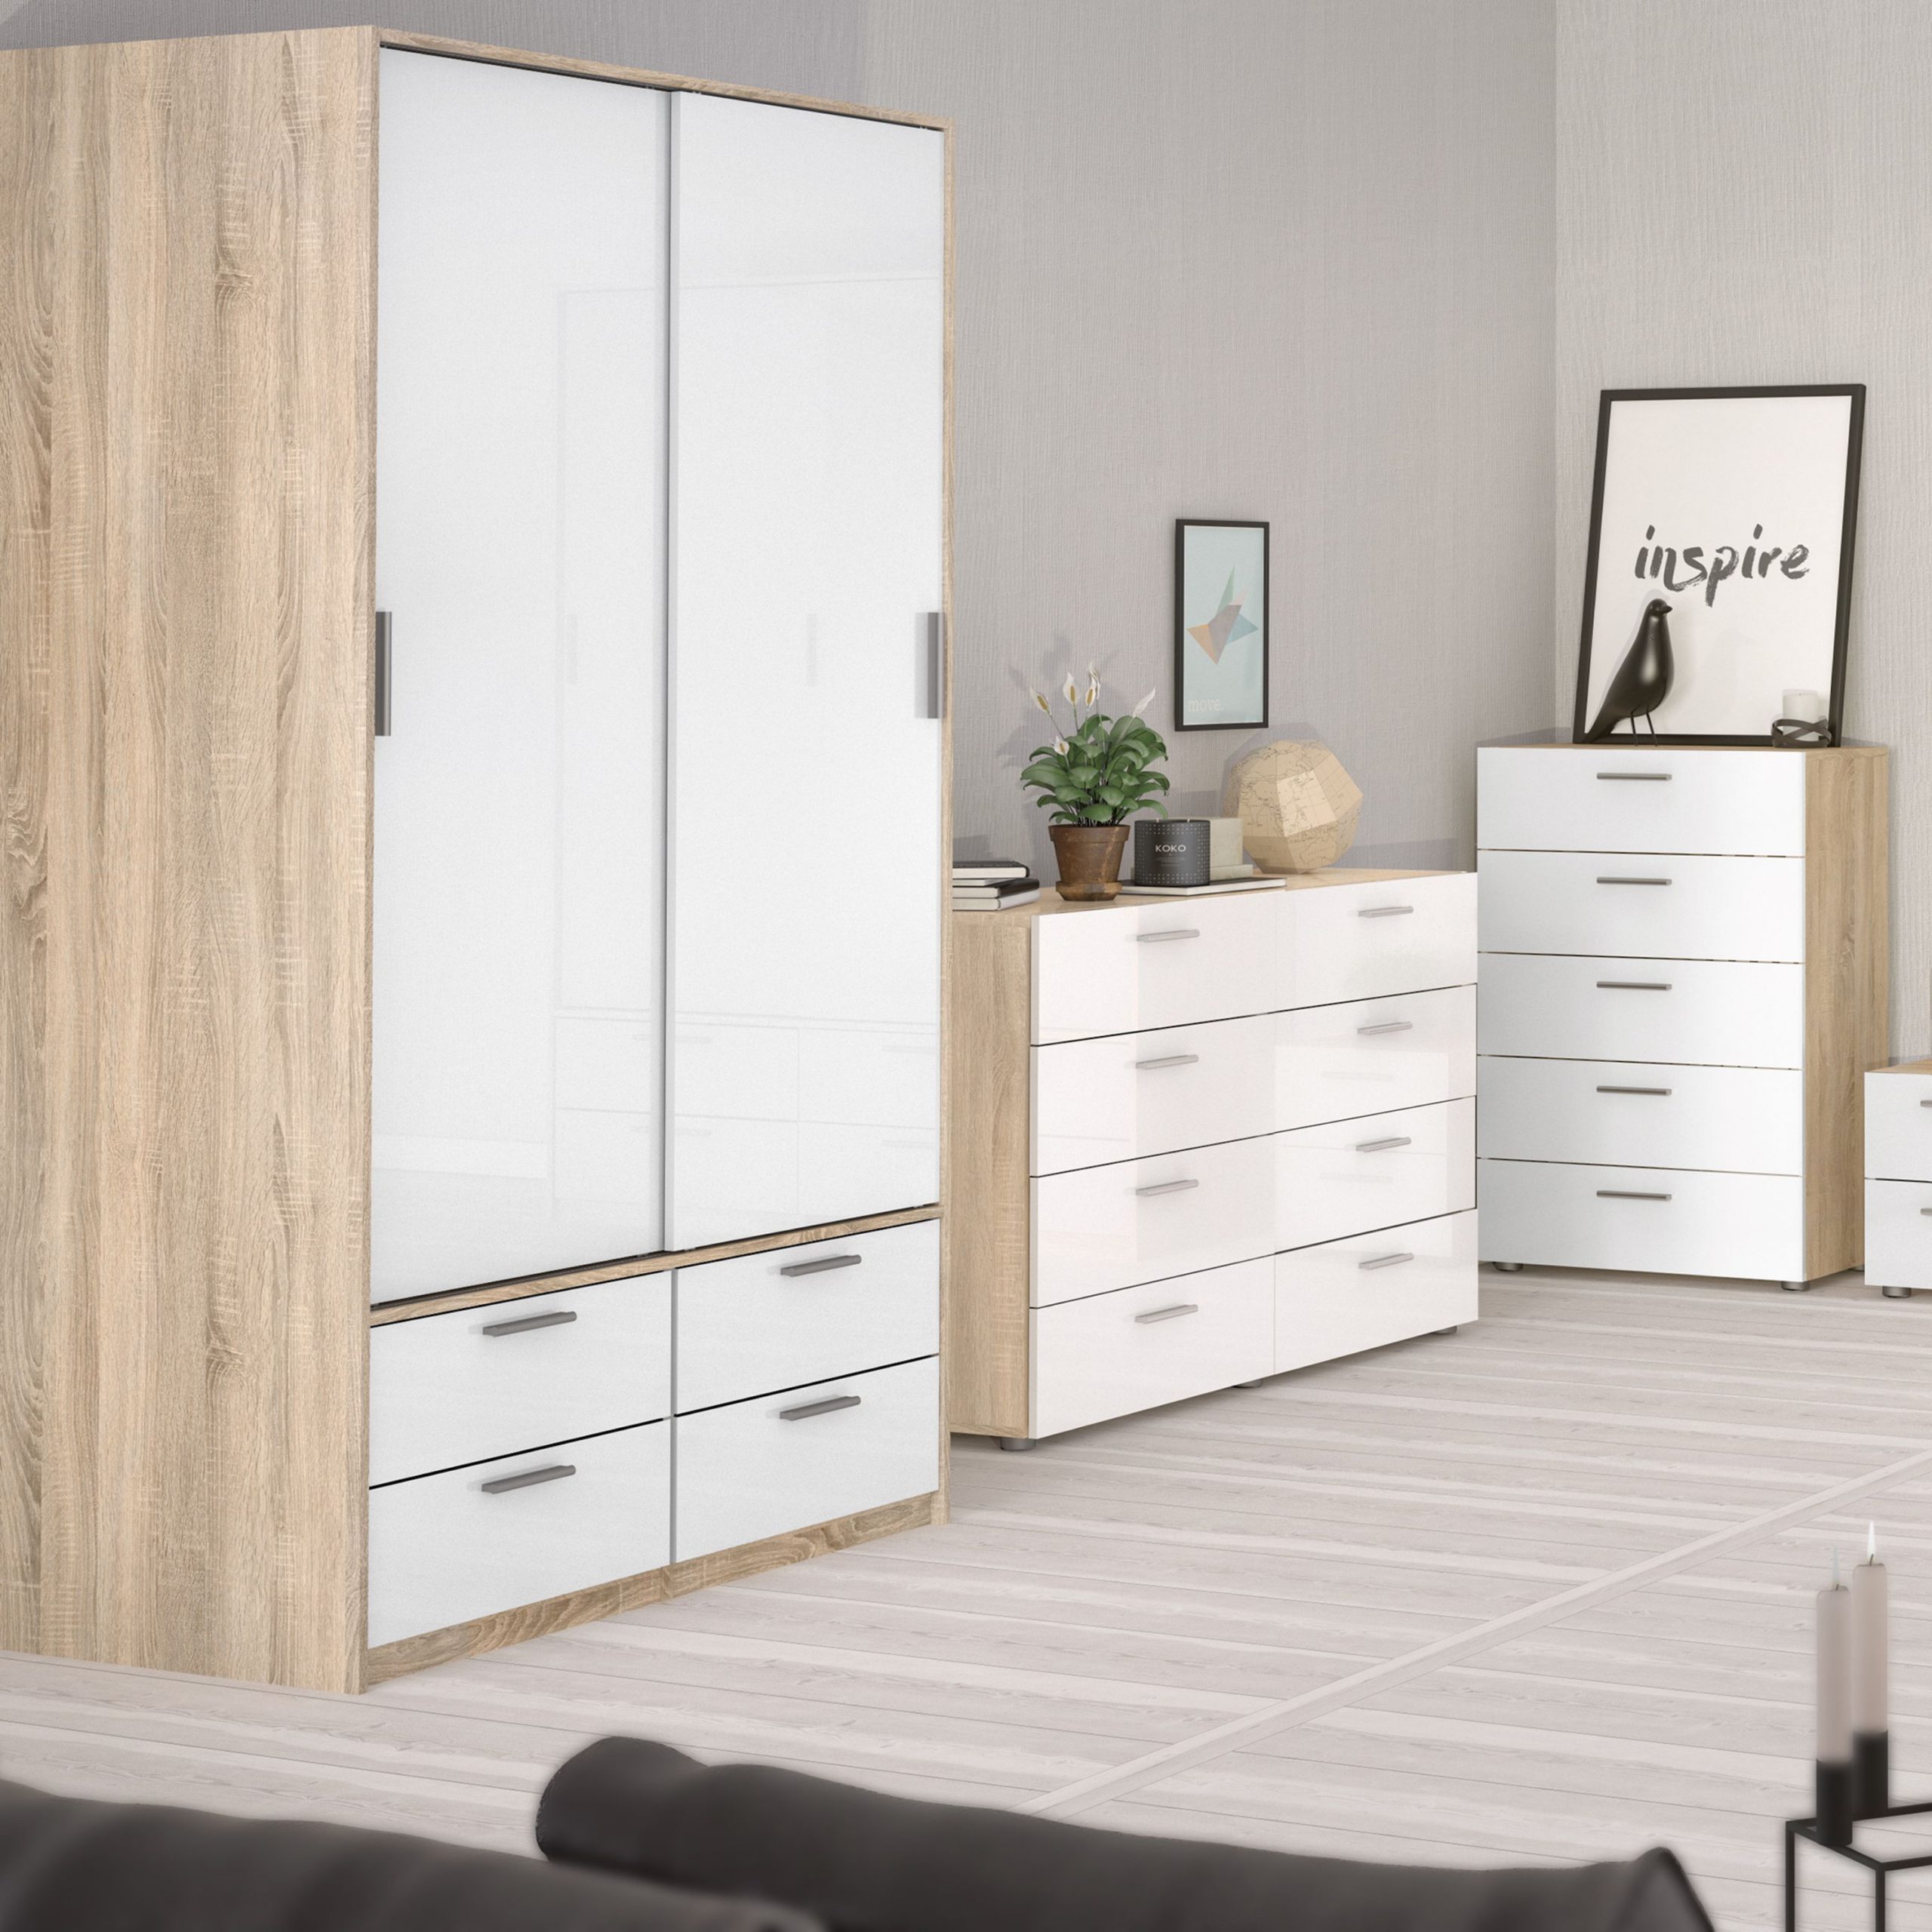 Wardrobe – 2 Doors 4 Drawers In Oak With White High Gloss